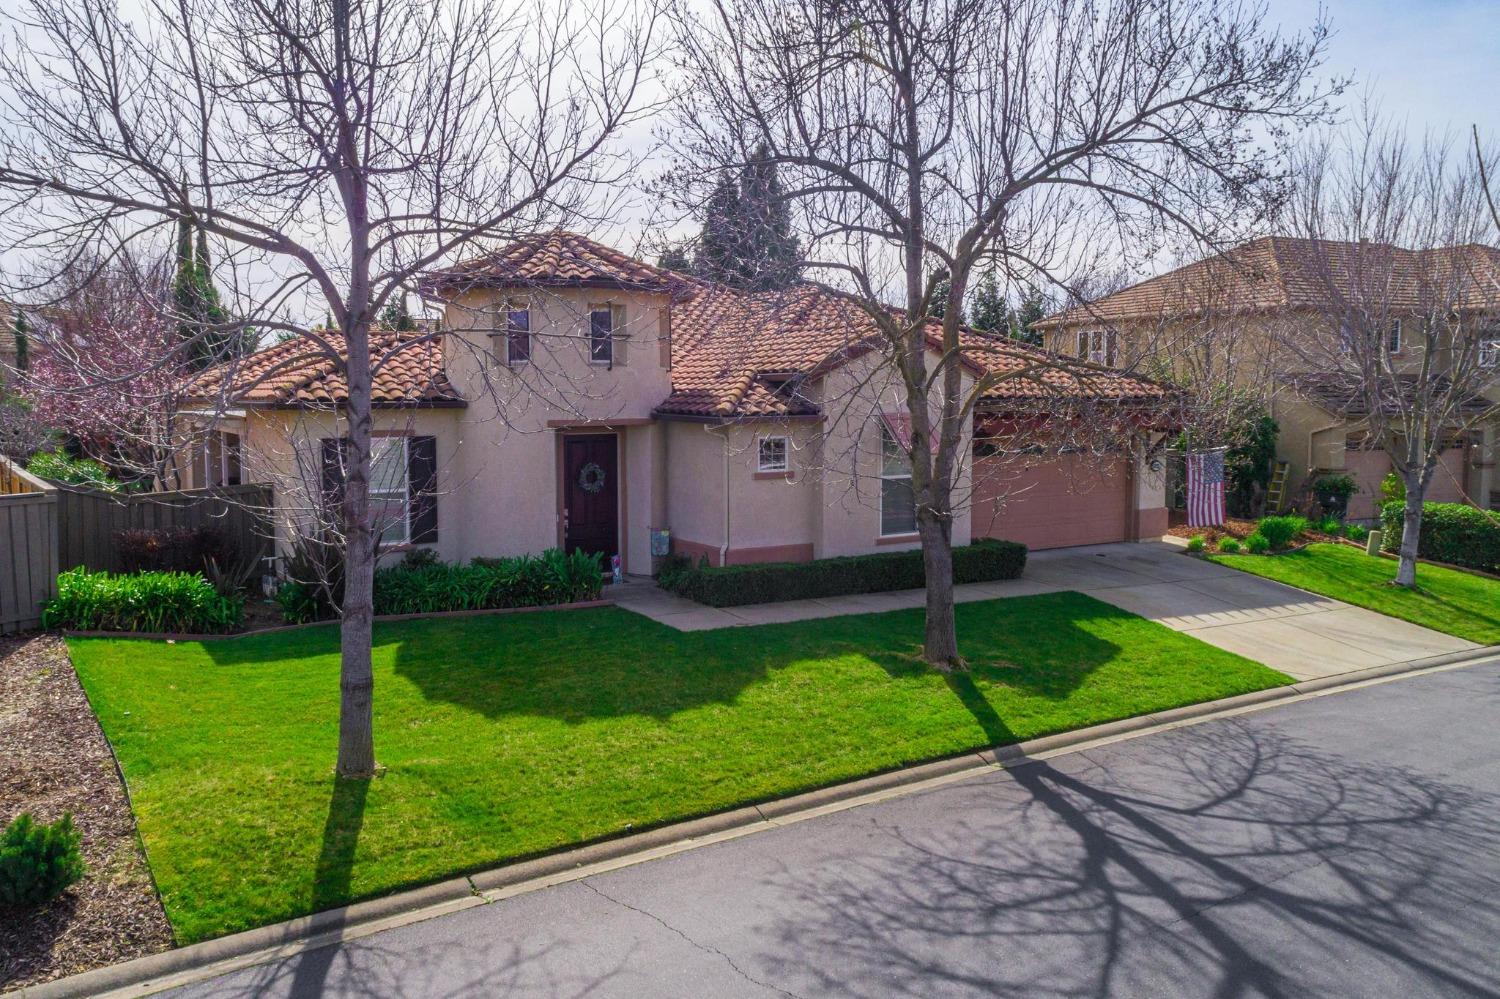 Photo of 3825 Northcliff Ln in Roseville, CA